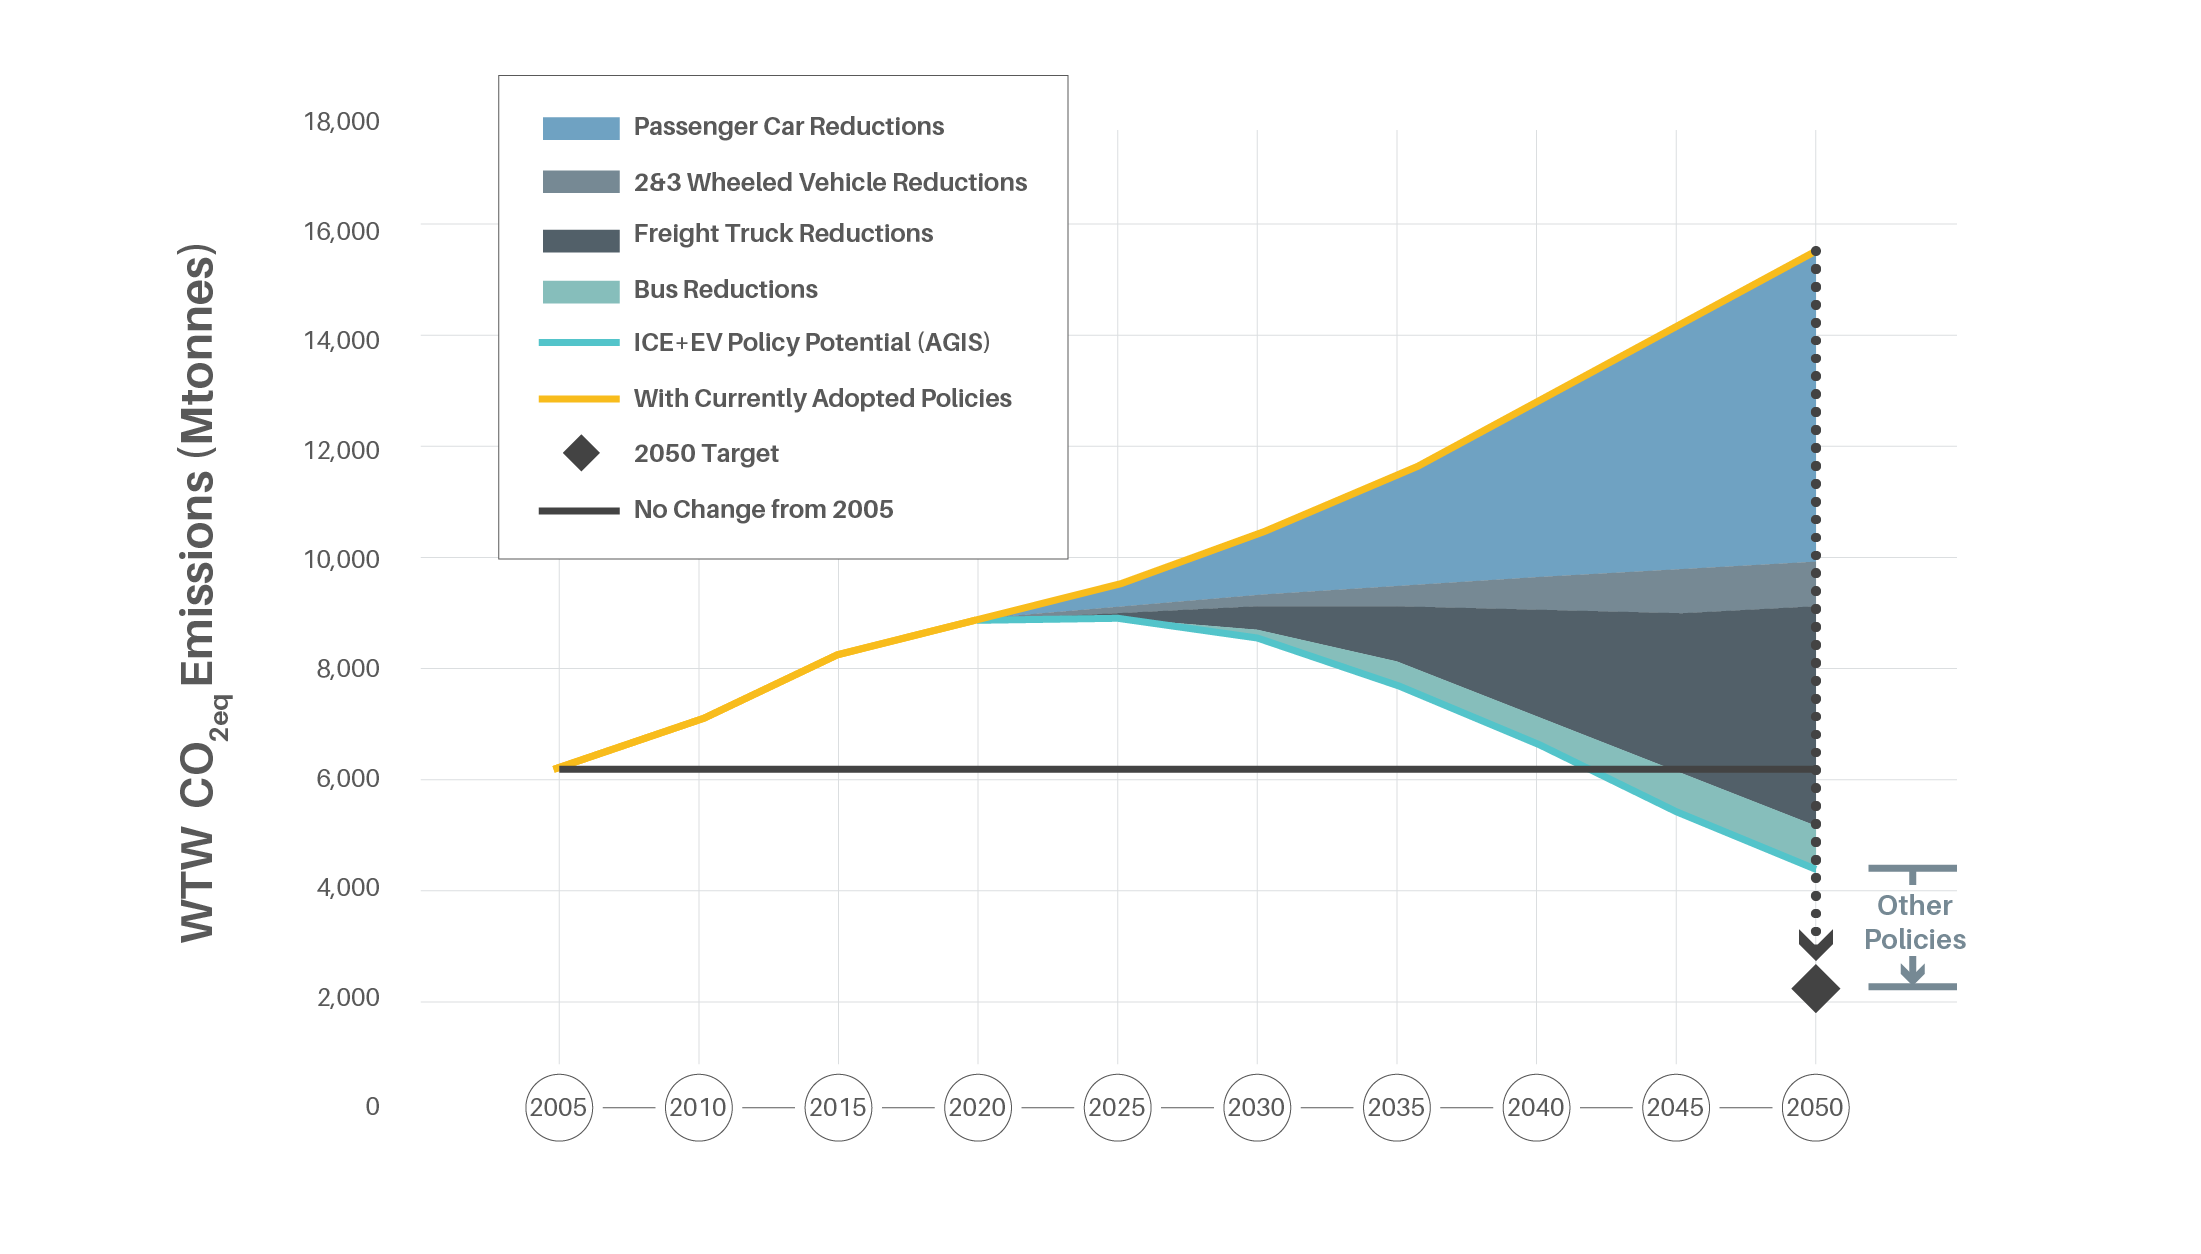 Emission reductions through vehicle efficiency-related measures by 2050